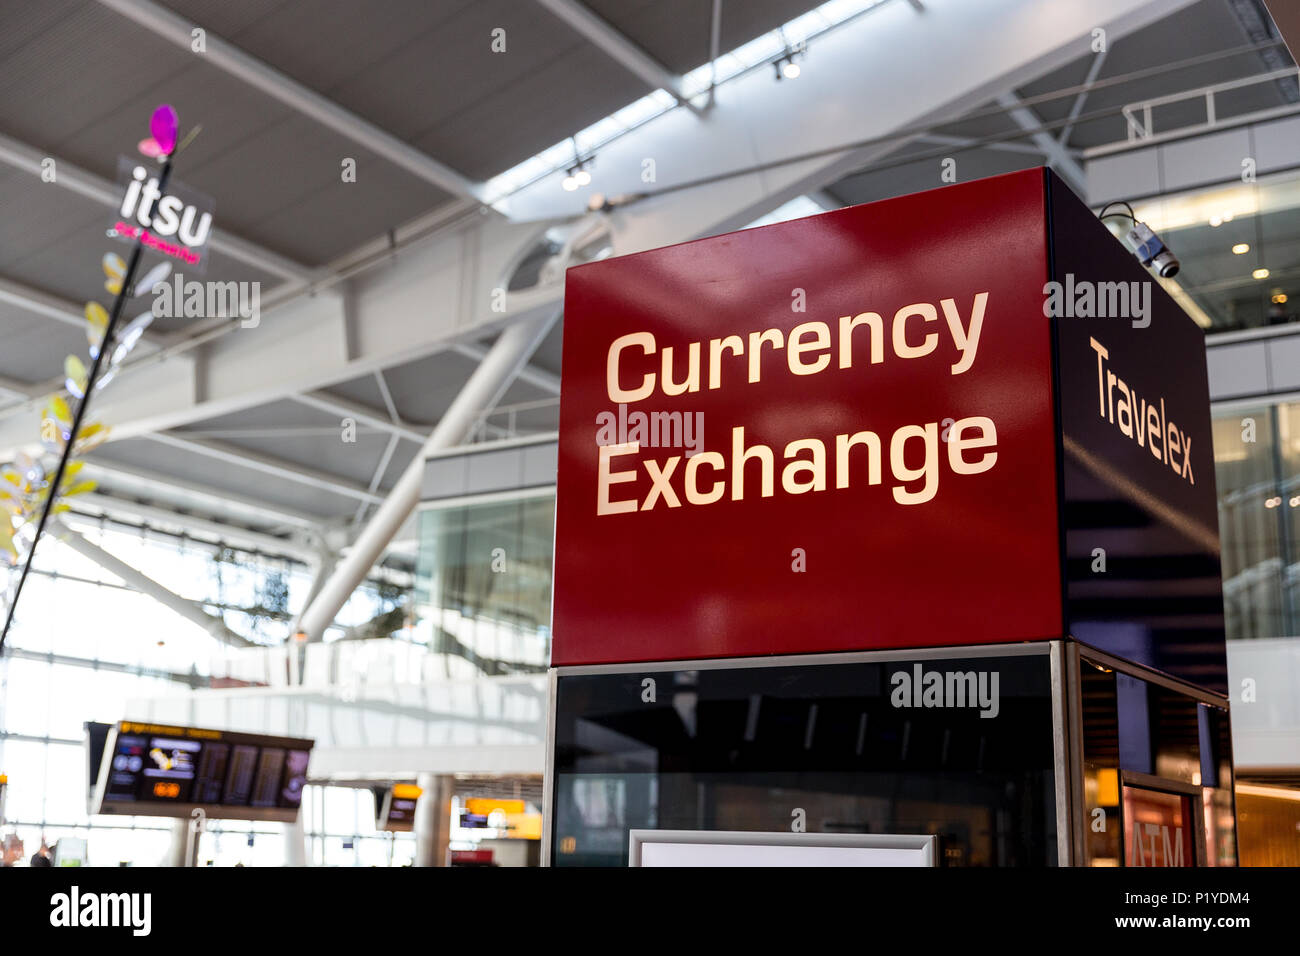 LONDON - MAY 27, 2018: Bureau de Change currency exchange sign at London Heathrow airport terminal Stock Photo